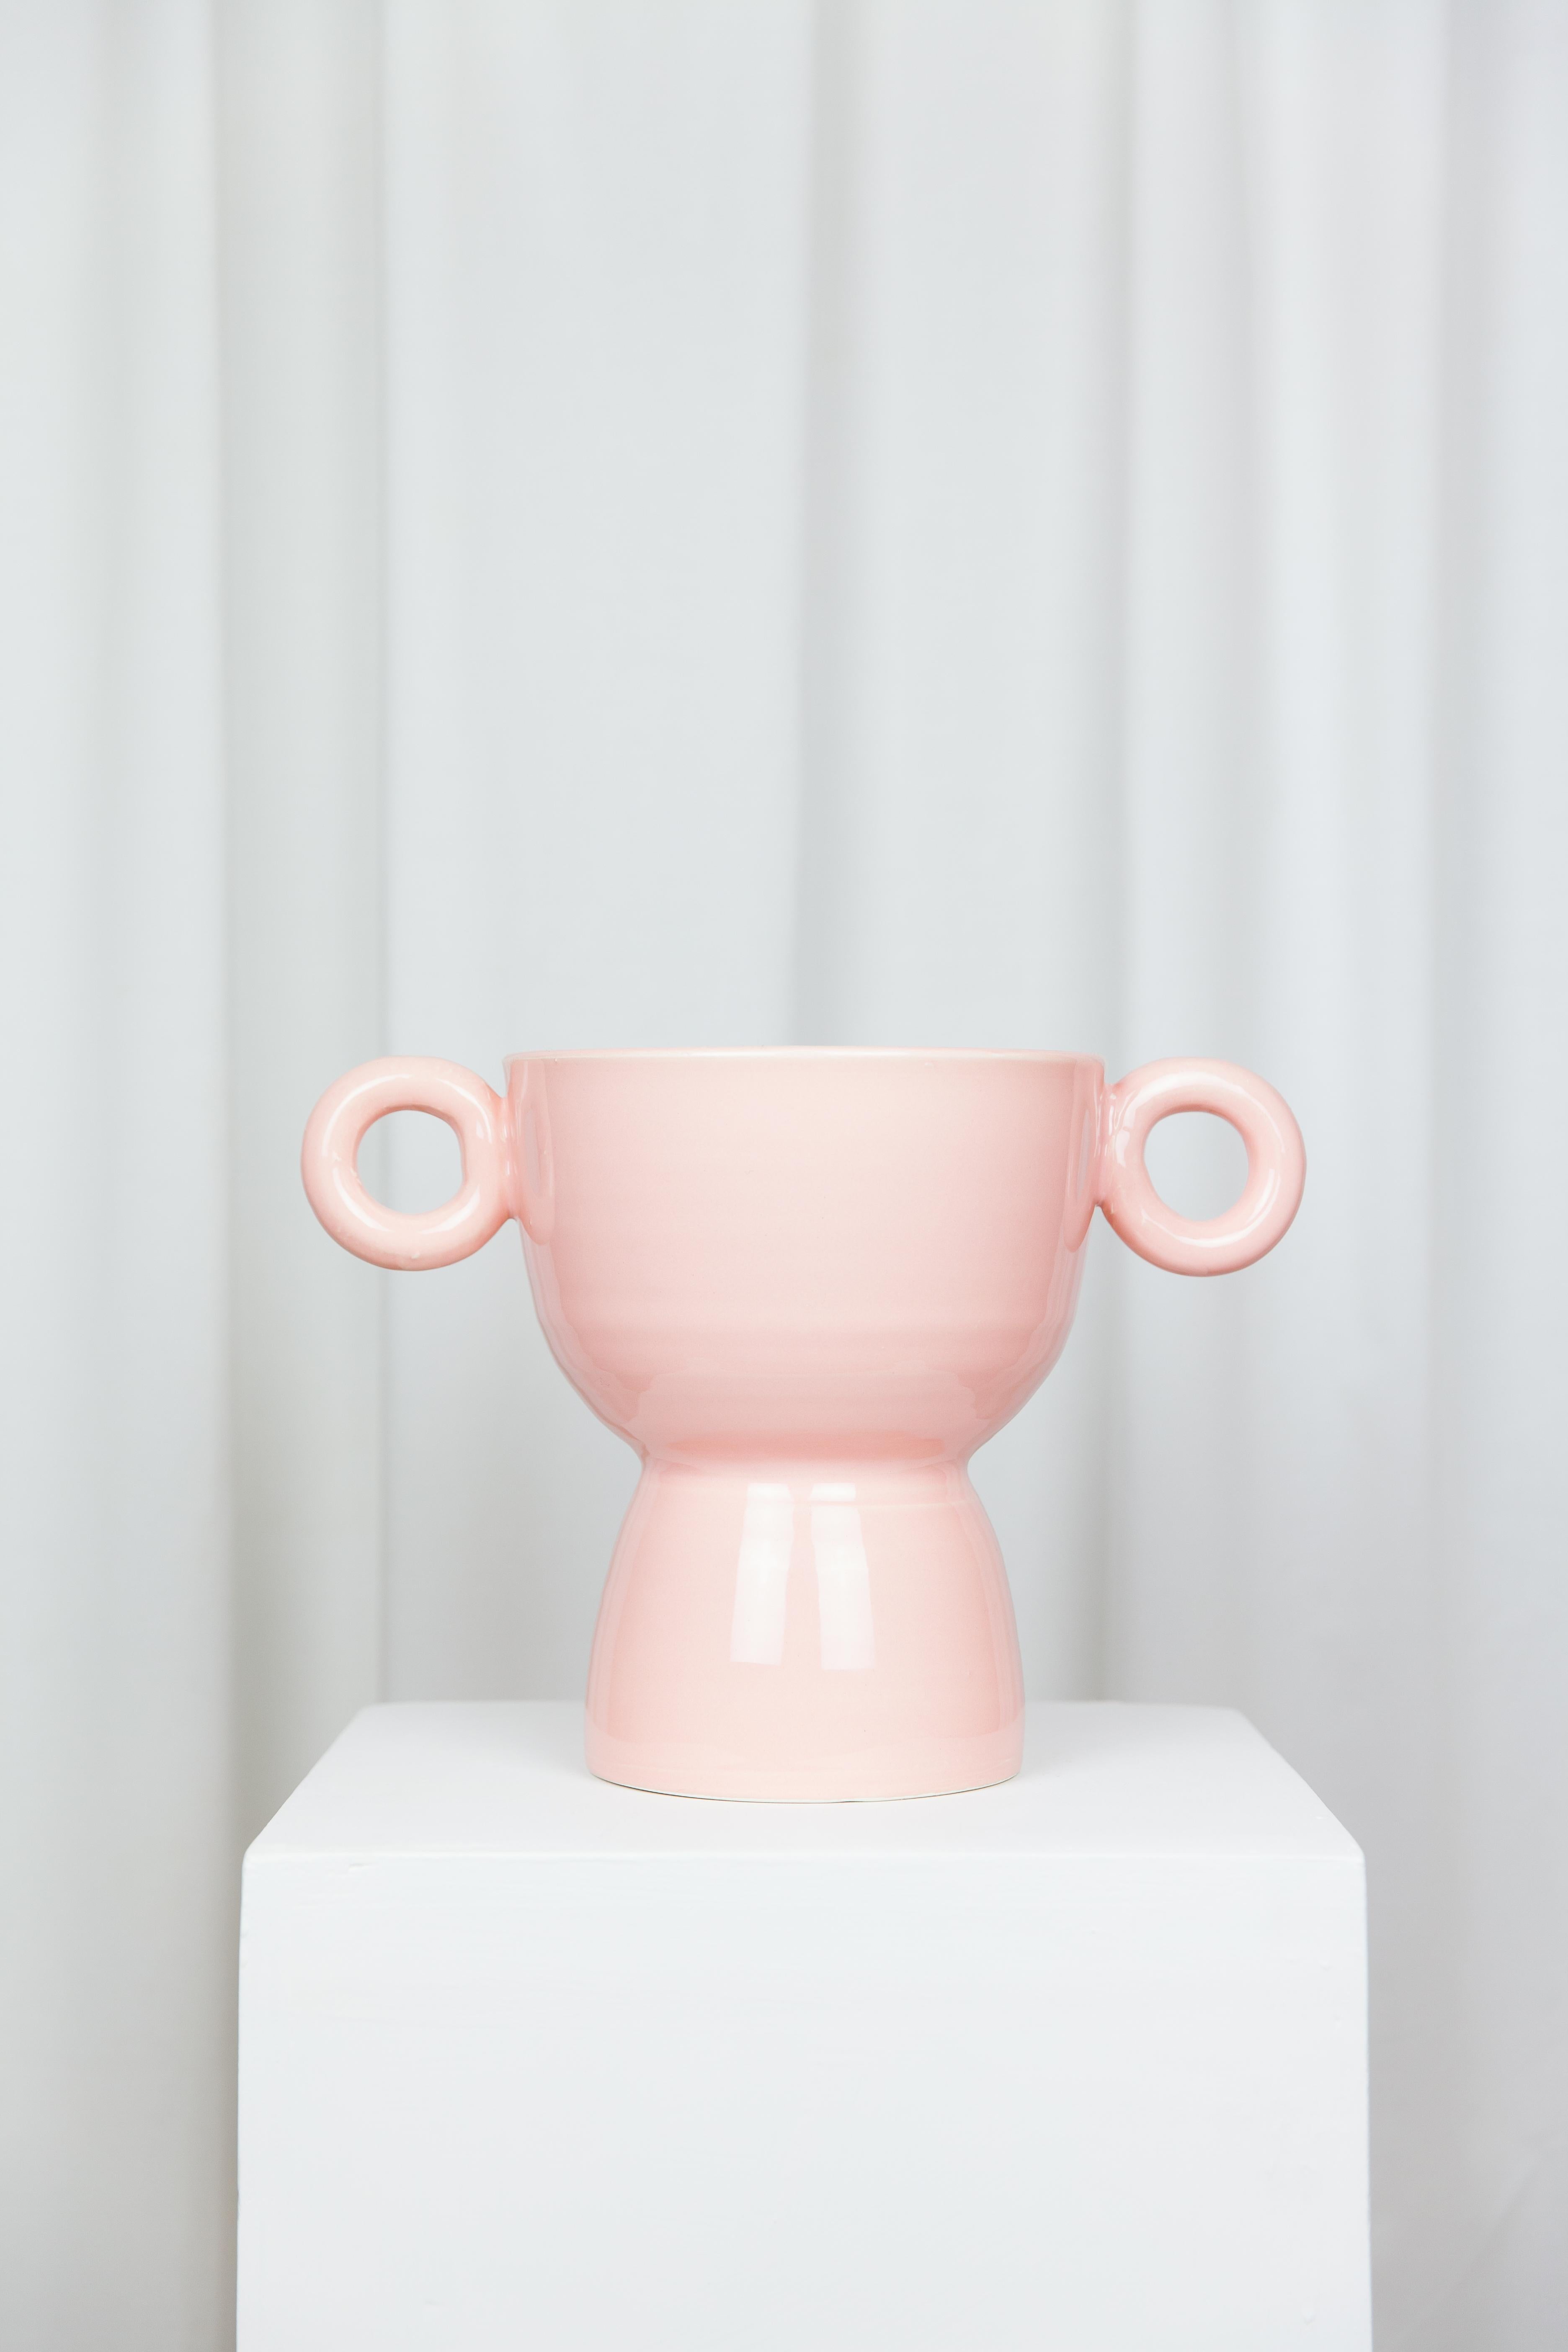 Fruit cup by Lola Mayeras
Dimensions: D 33 x W 20 x W 24 cm
Materials: Earthenware.

Fruit bowl in white earthenware, glazed in
pink. This piece is designed and handcrafted in the south of France.

Lola Mayeras — Designer 
In parallel with